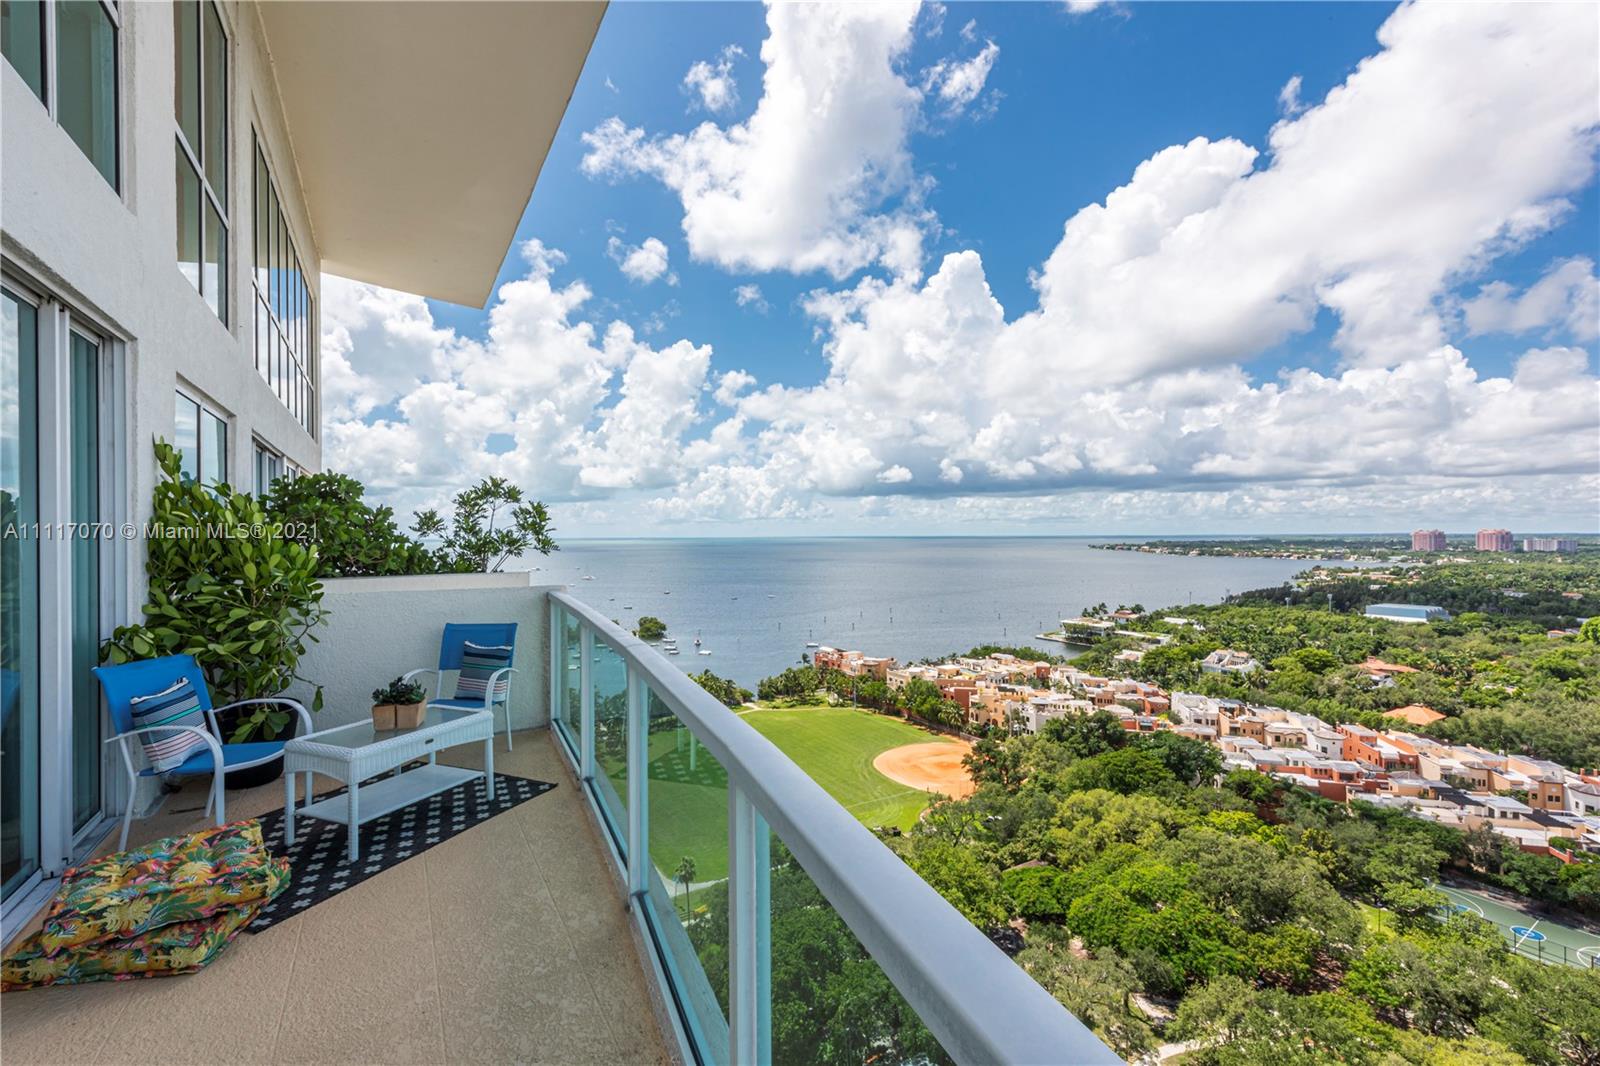 Spectacular 2-level, corner penthouse with sweeping views of the Grove village & Biscayne Bay. 25’ ceilings w/ walls of glass opening to large balcony & tropical lanai for outdoor dining. 2BR/2.5 BA + den/office. Being sold fully furnished with stunning designer pieces throughout. Full-service Condo/Hotel offers 24 hr. concierge, state-of-the-art fitness center, 8th floor pool, sun deck & restaurant with water views. Located in the center of the village of Coconut Grove. Walk to galleries, boutiques, cafes and bayfront parks & marinas. Unit is currently rented through May 2022. Two assigned parking spaces & valet parking available. No association approval required.